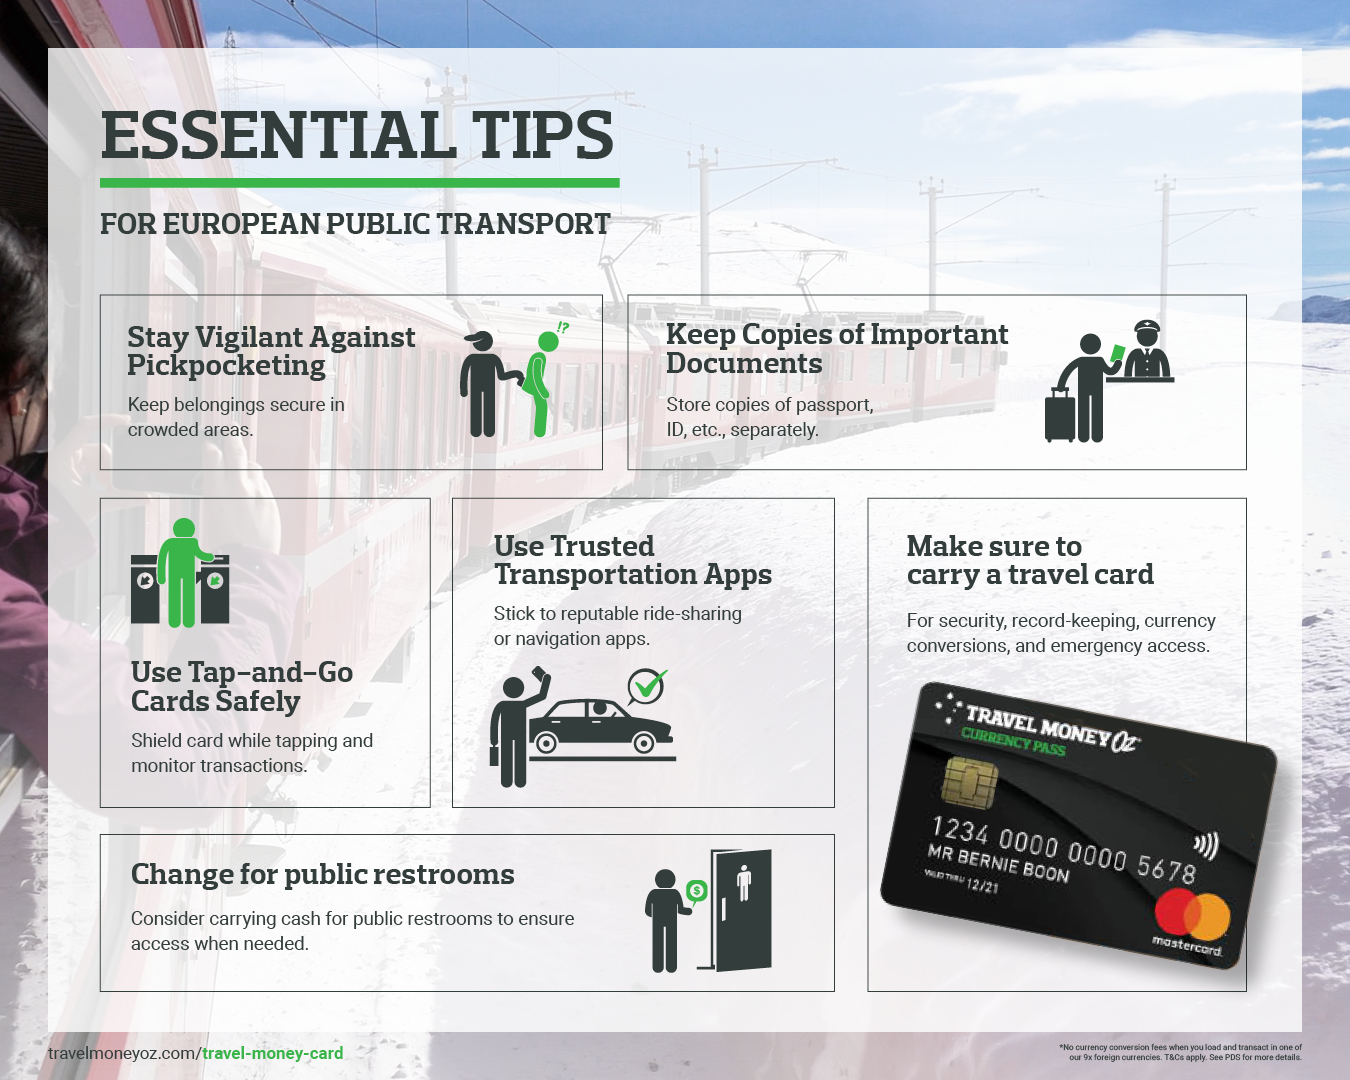 Complete Guide to Public Transport in Europe: European Public Transport Tips and Tricks Infographic